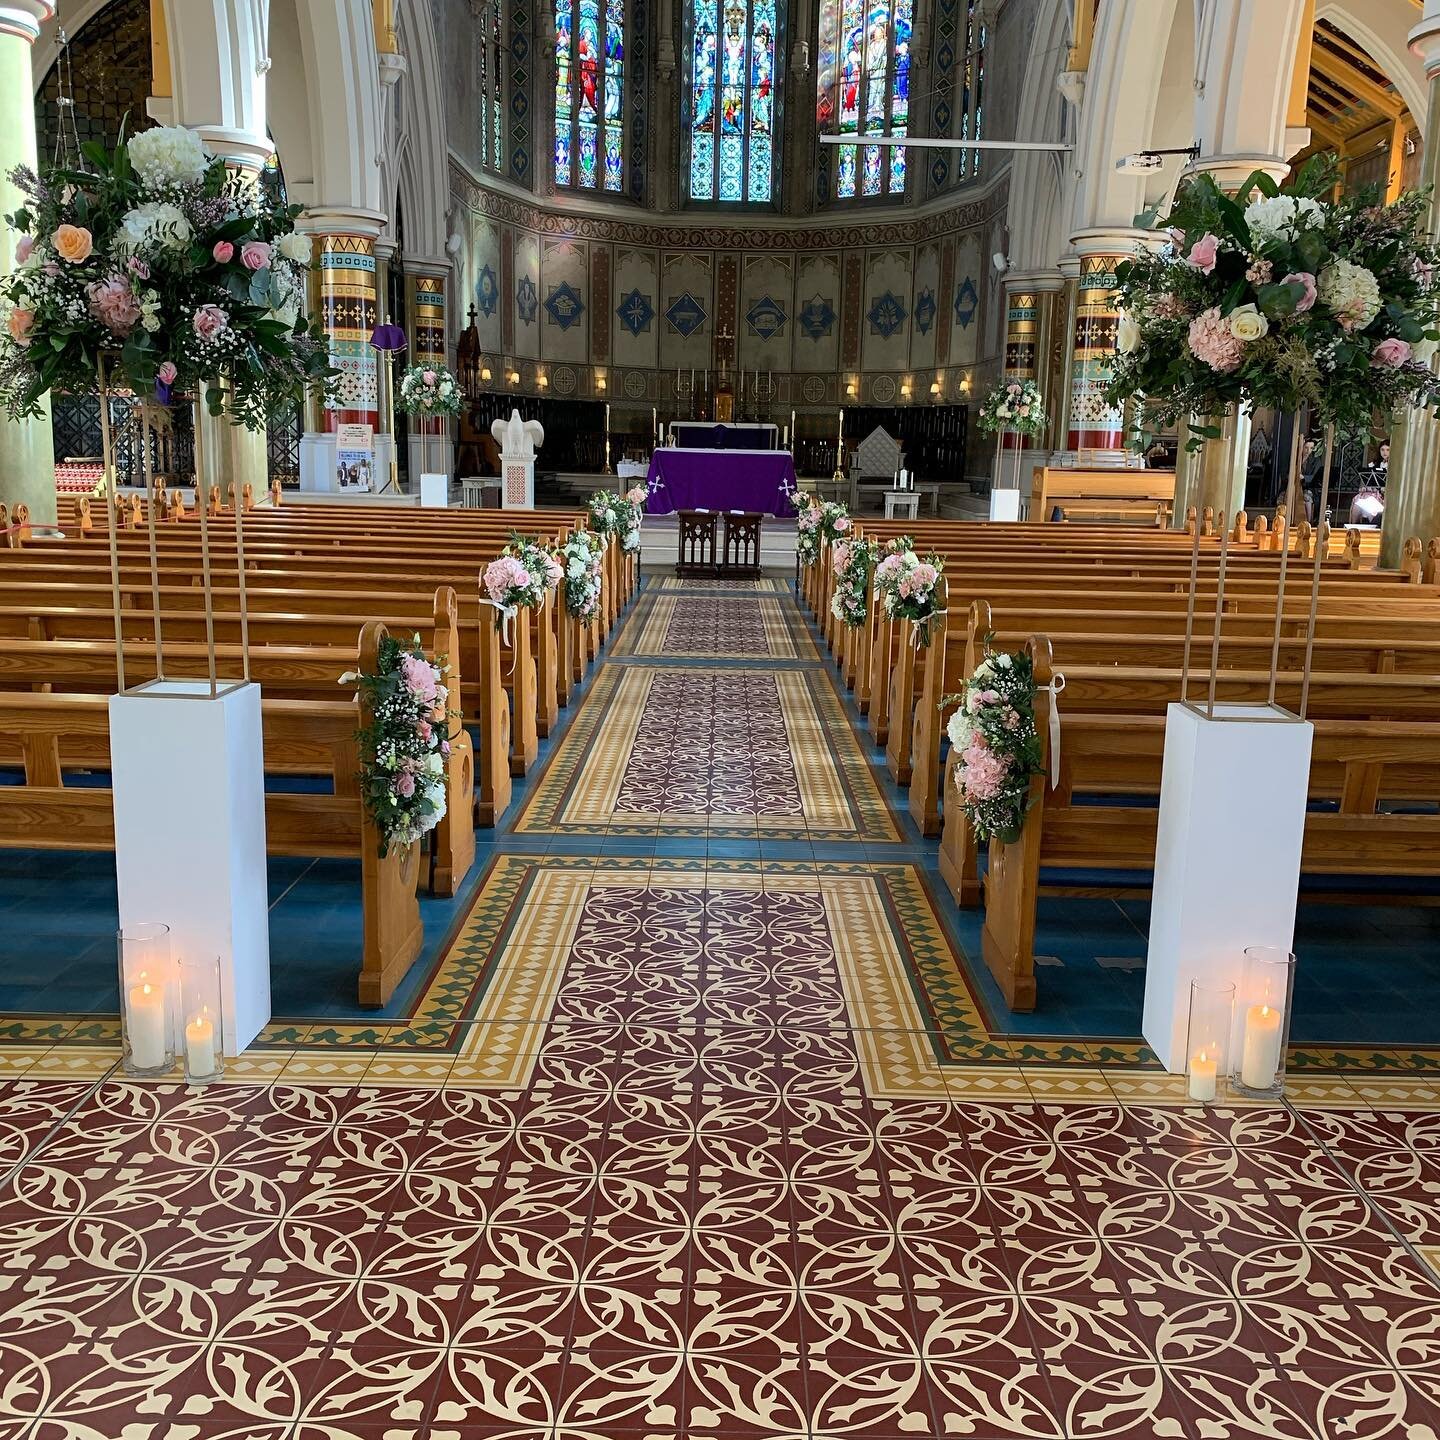 Aisle flowers @stpeterscathedral for Sarah &amp; Scott 💕 All arrangements were adapted to suit @belfast_castle as centrepieces - Swipe to view 🌸🌷🤍
#cathedralwedding #cathedralflowers #aisleflowers #whitewedding #belfastcathedral #gettingmarriedin